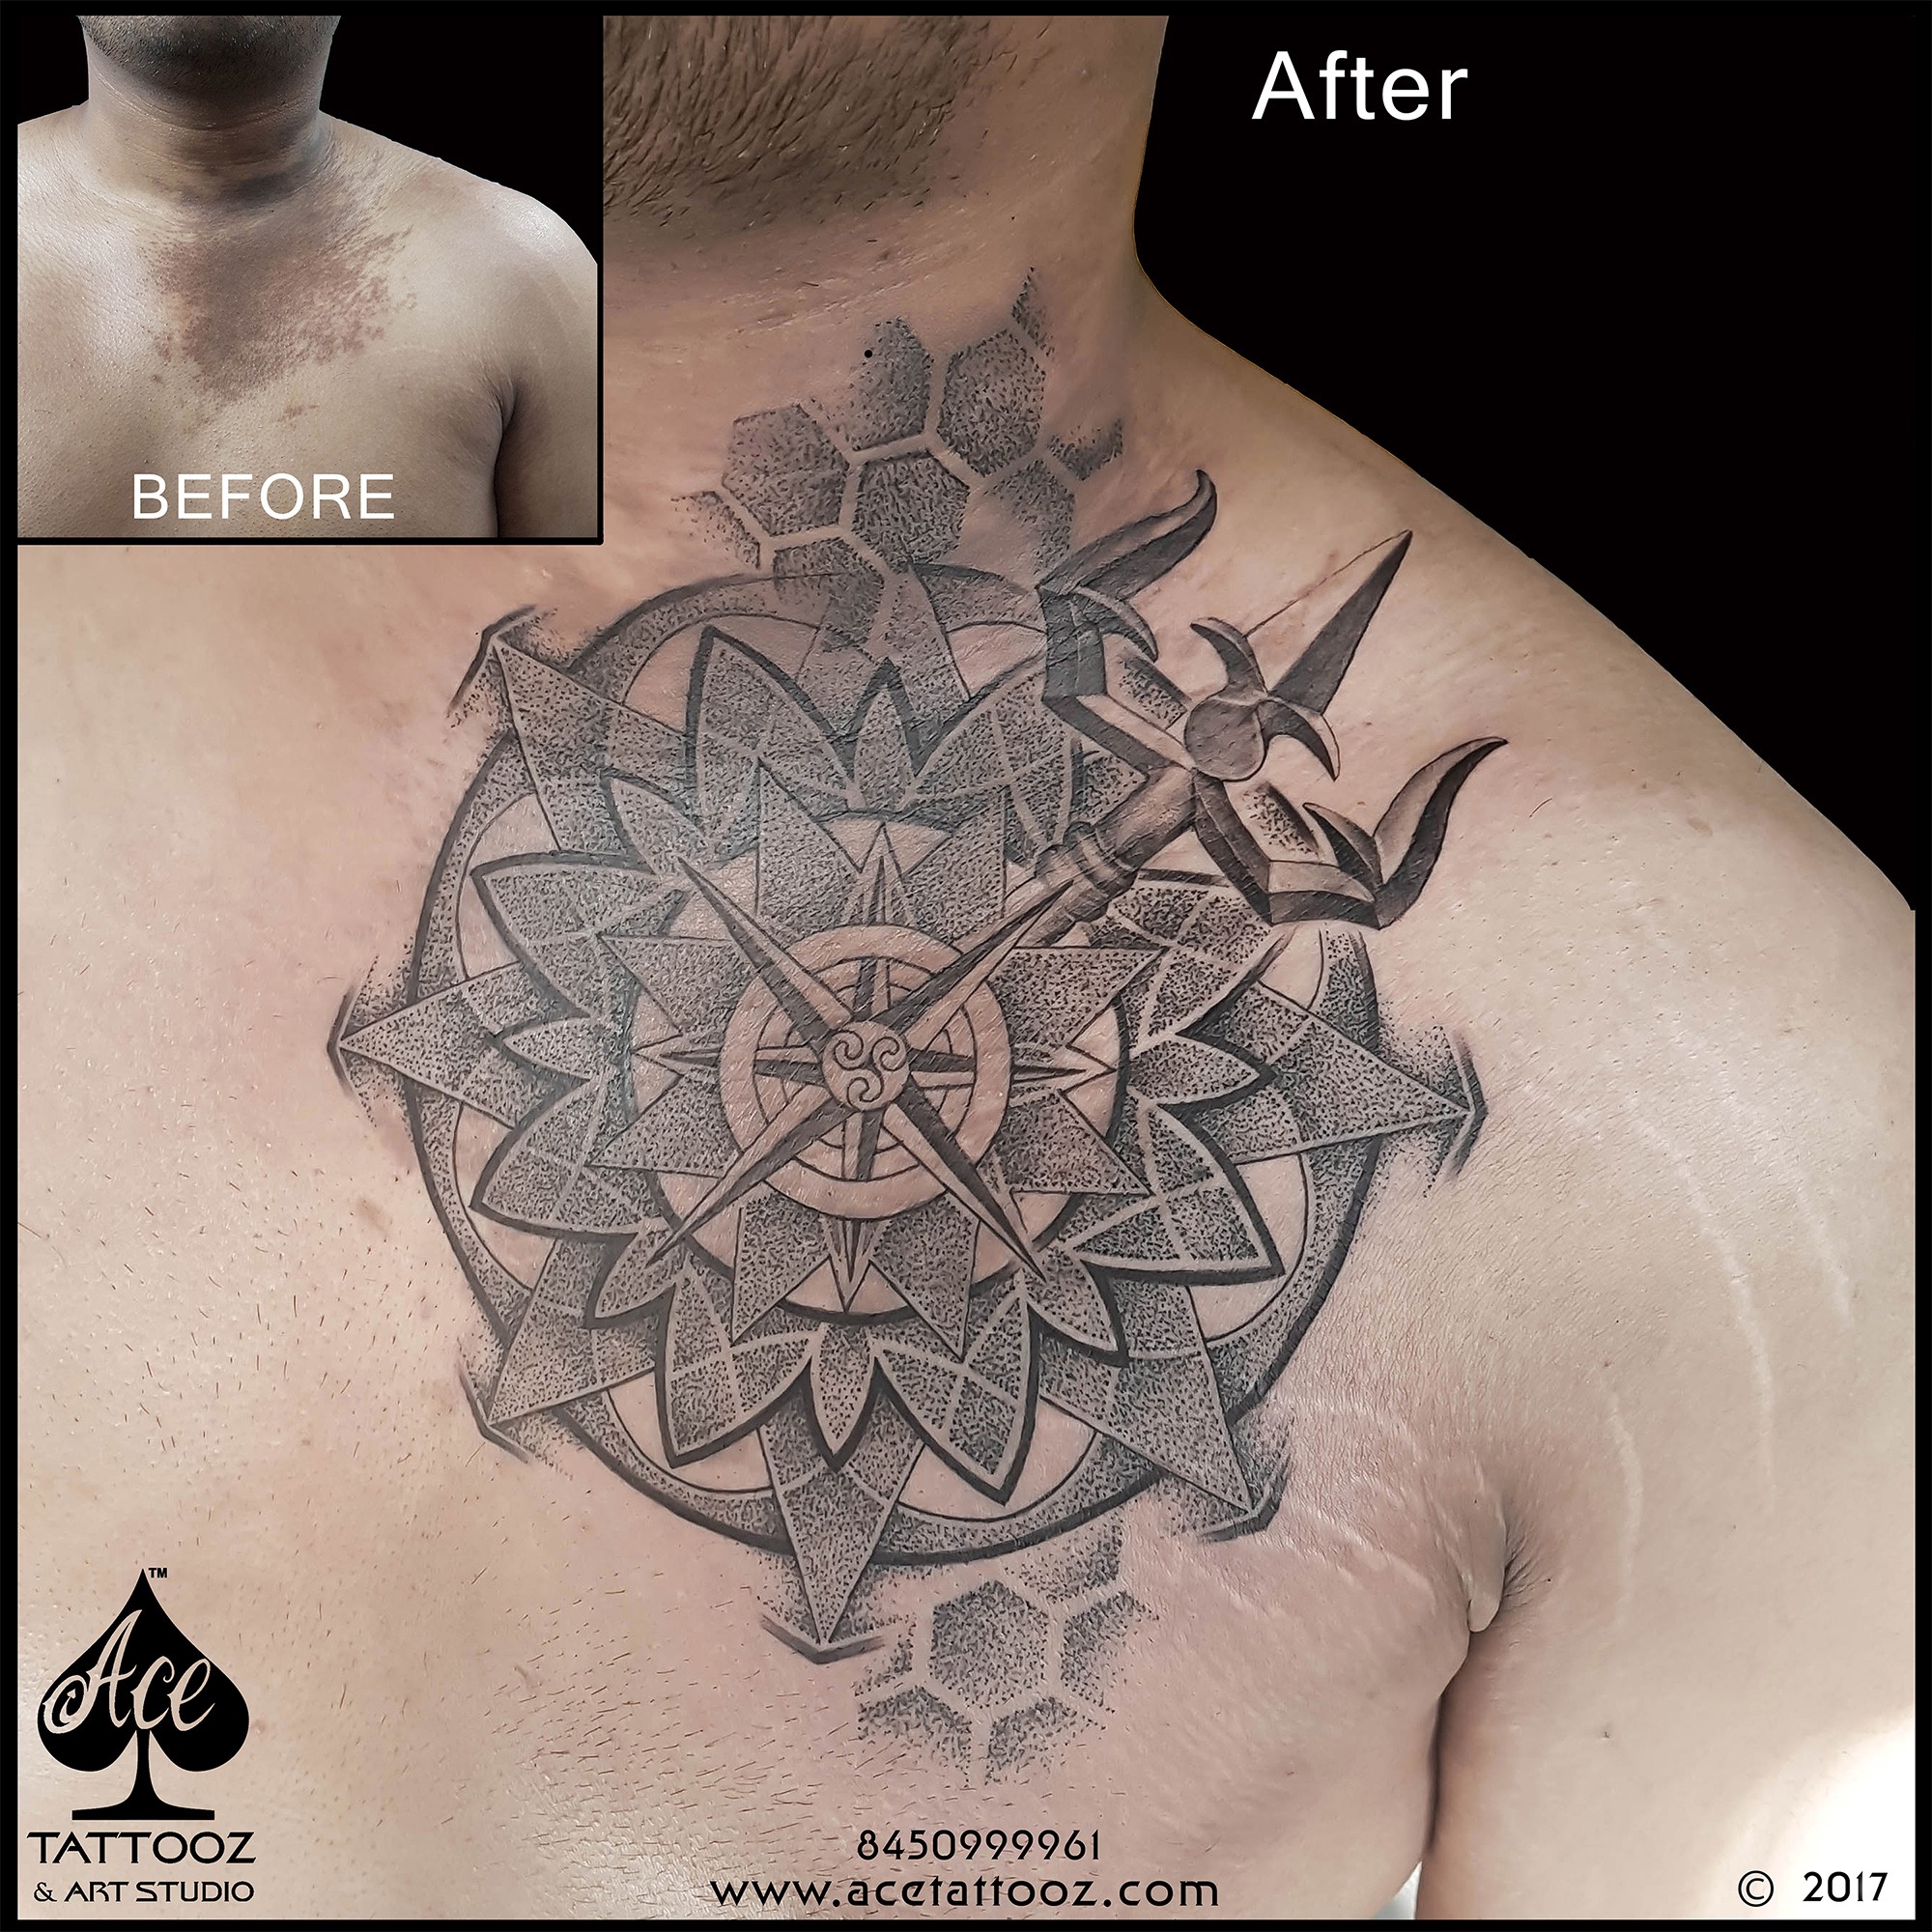 Scar Cover Up Tattoos - Tattoo Collections